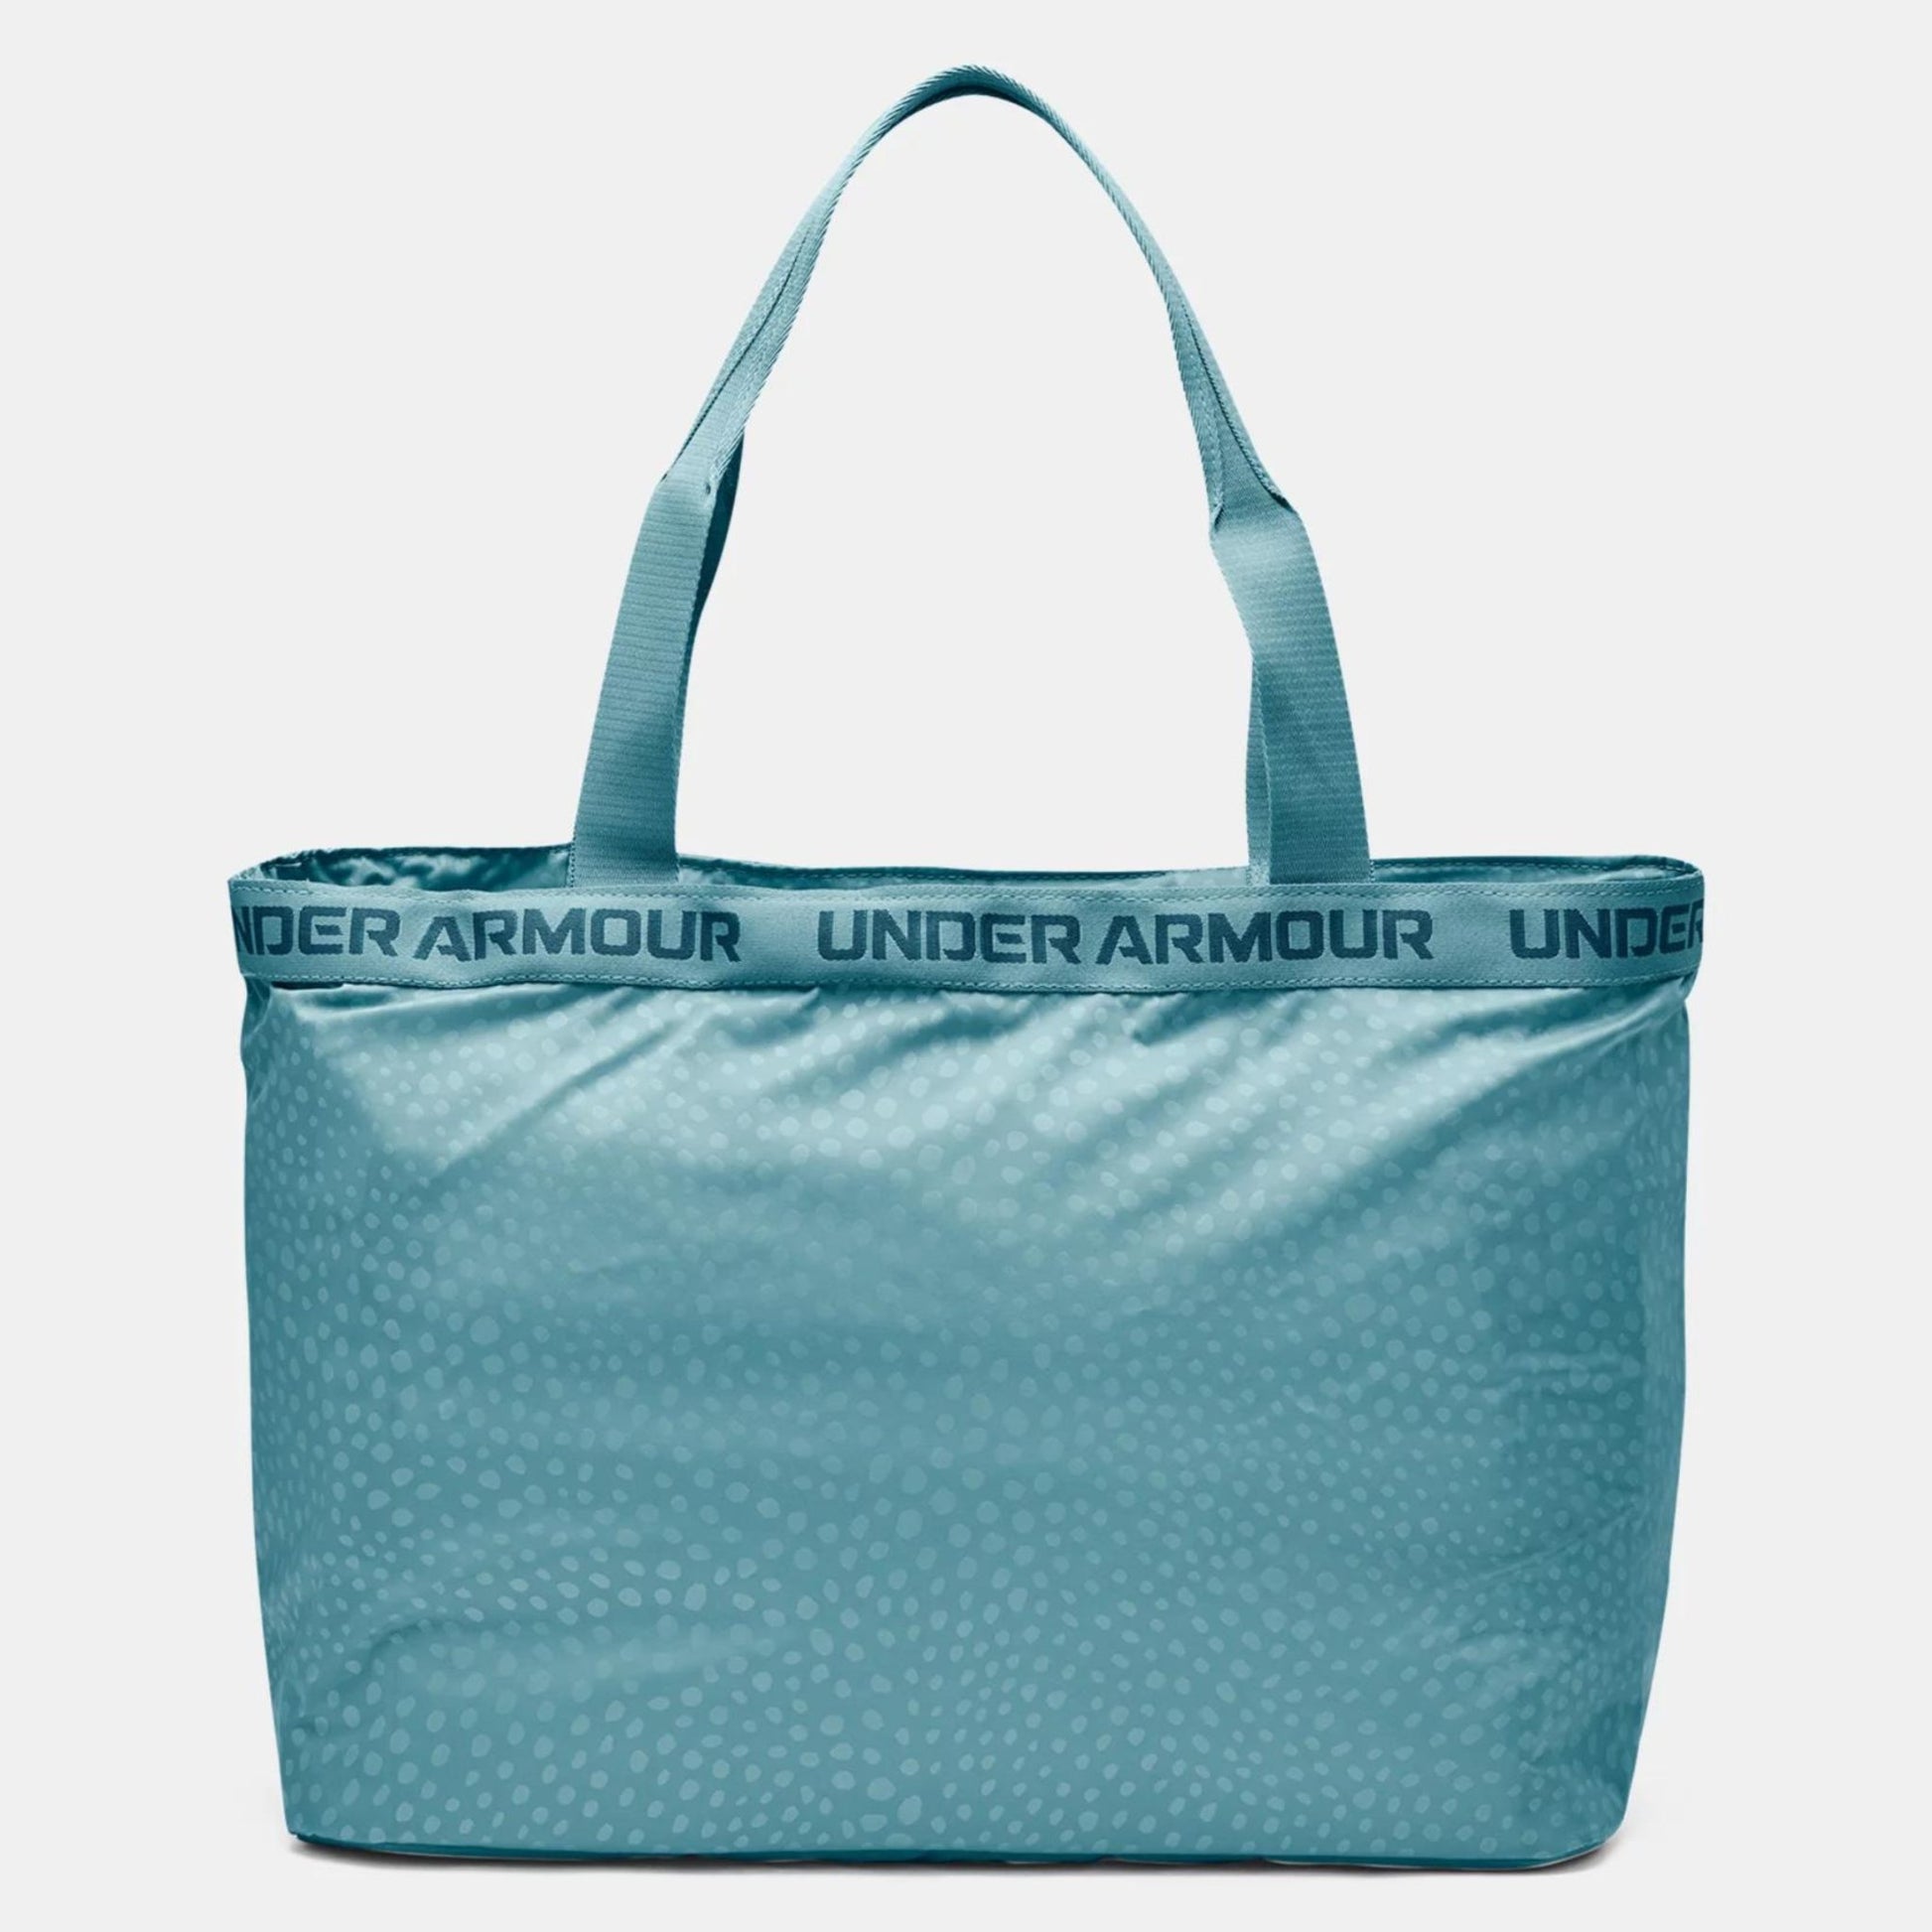 Under Armour-Under Armour Women's Essentials Tote Tote Bag (Static Blue) - Brandat Outlet